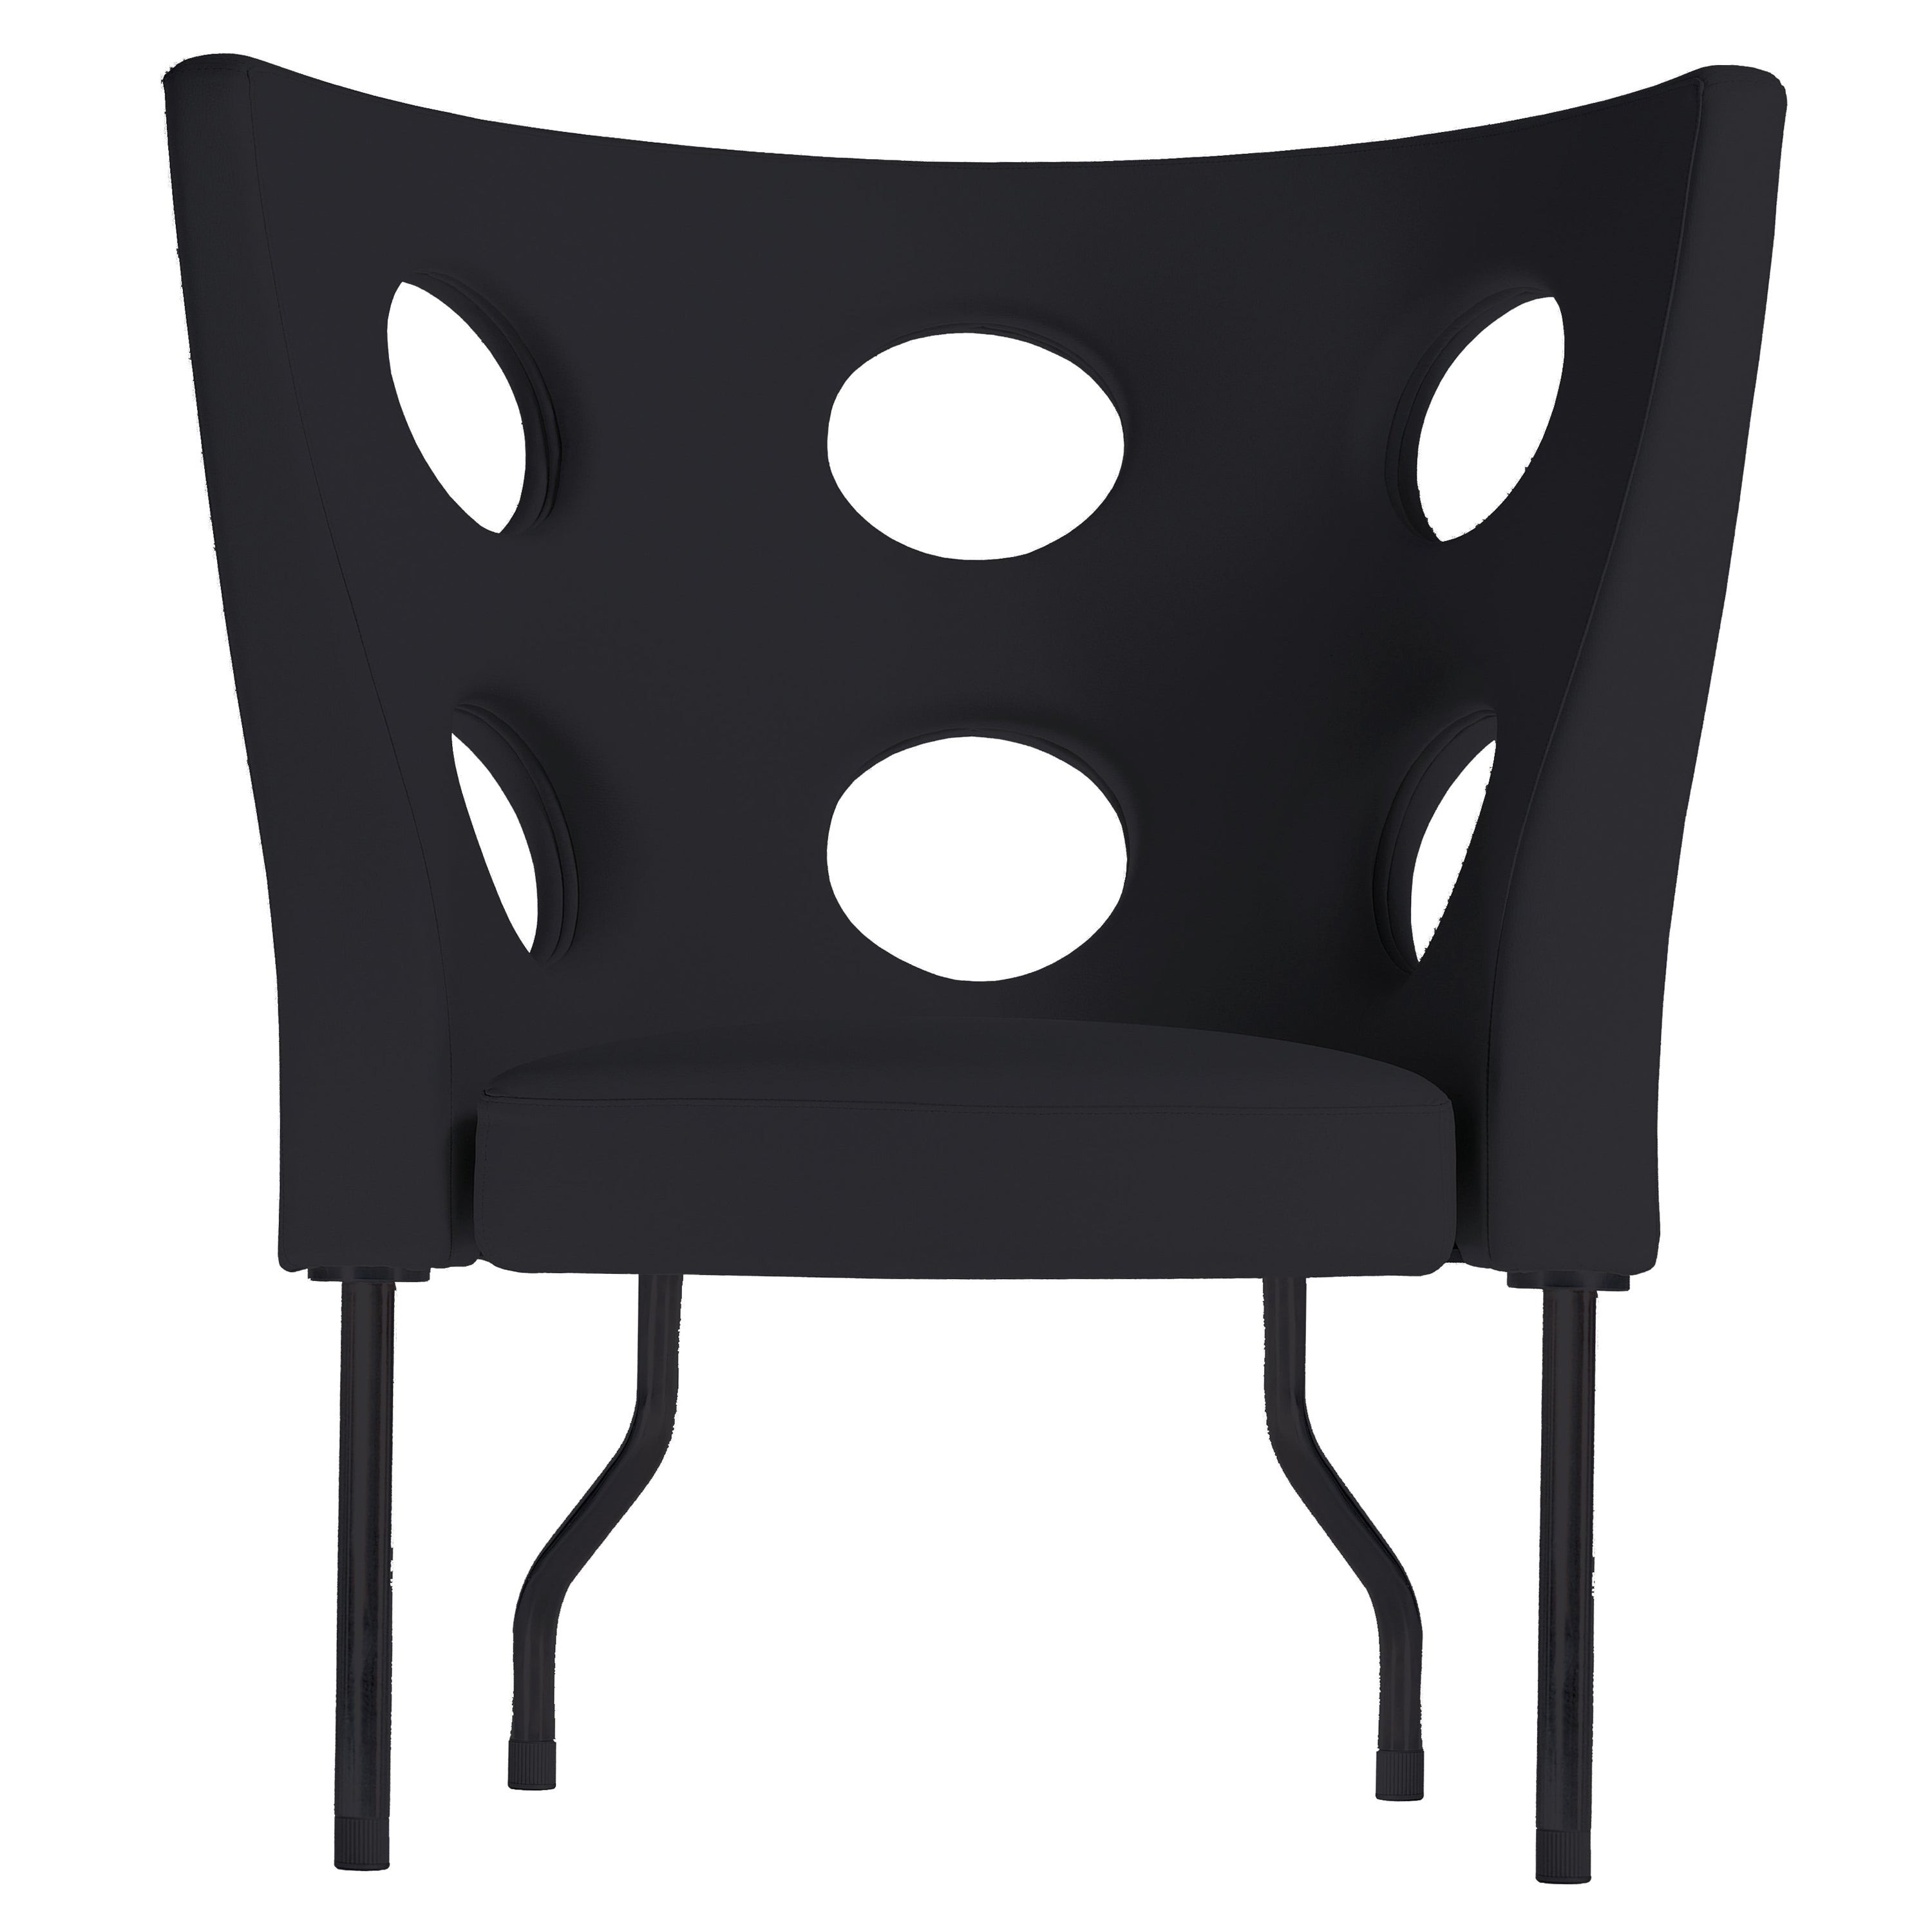 Alias 911 Monoflexus Armchair in Black with Upholstery and Lacquered Steel Frame For Sale